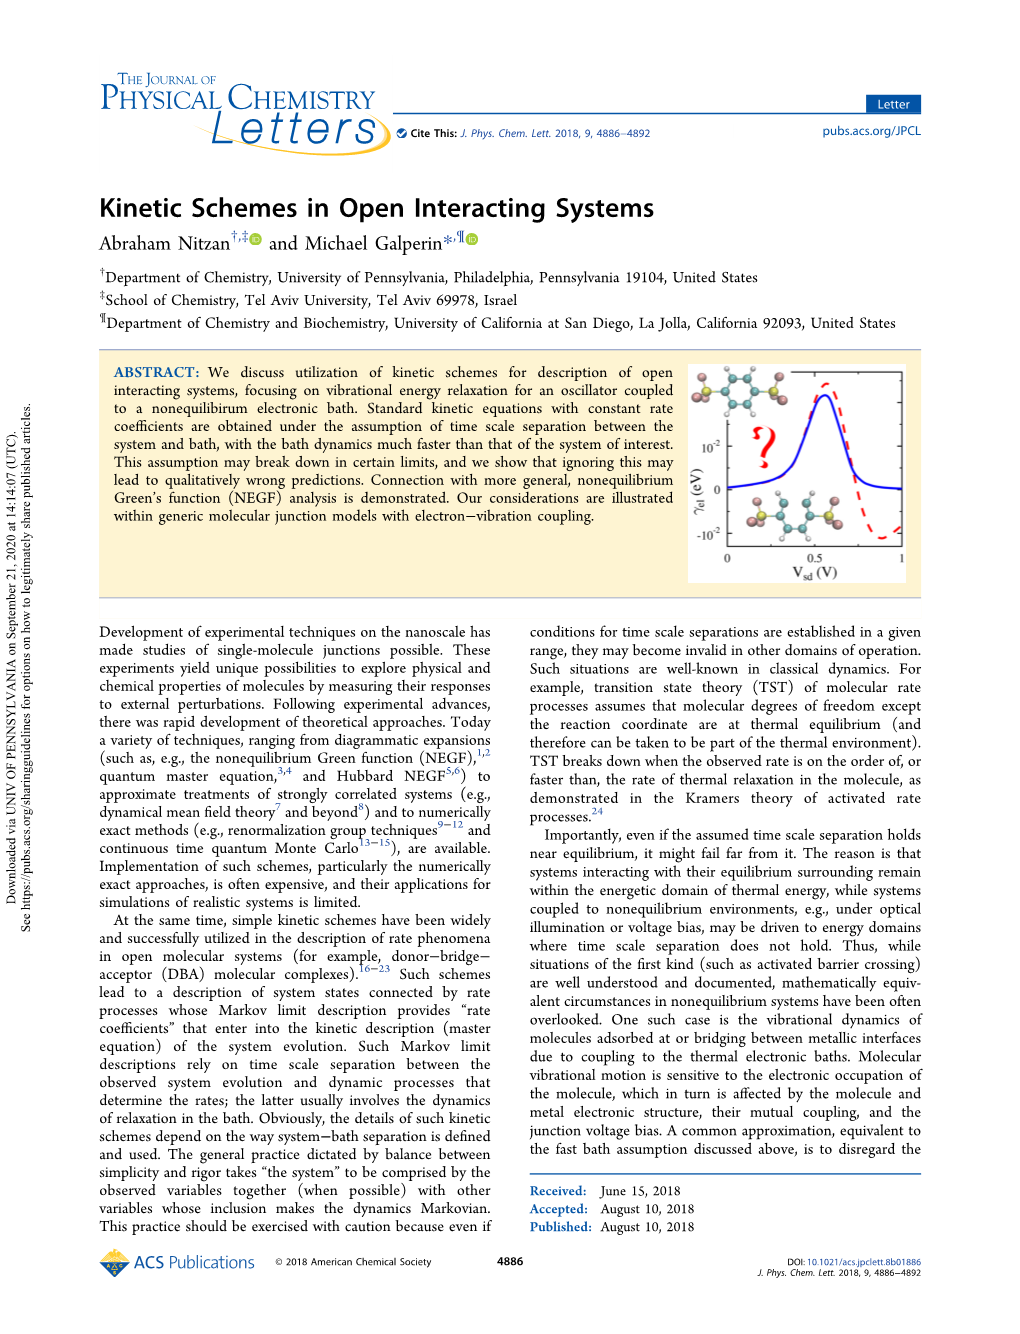 Kinetic Schemes in Open Interacting Systems Abraham Nitzan†,‡ and Michael Galperin*,¶